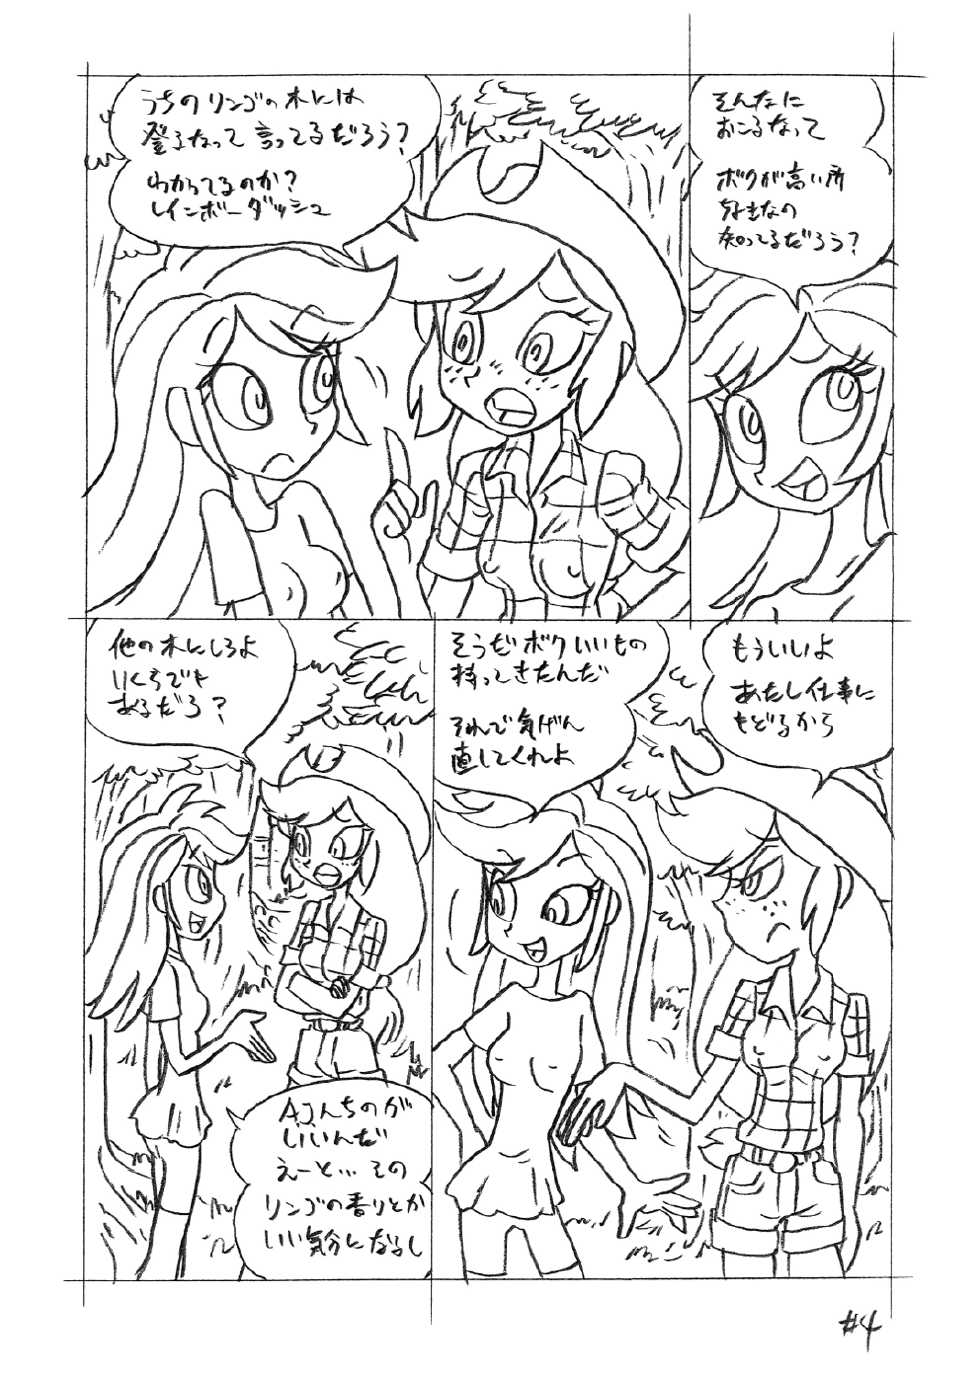 [Union of the Snake (Shinda Mane)] Psychosomatic Counterfeit EX- A.J. in E.G. Style (Ver. 02) (My Little Pony: Friendship Is Magic) - Page 3